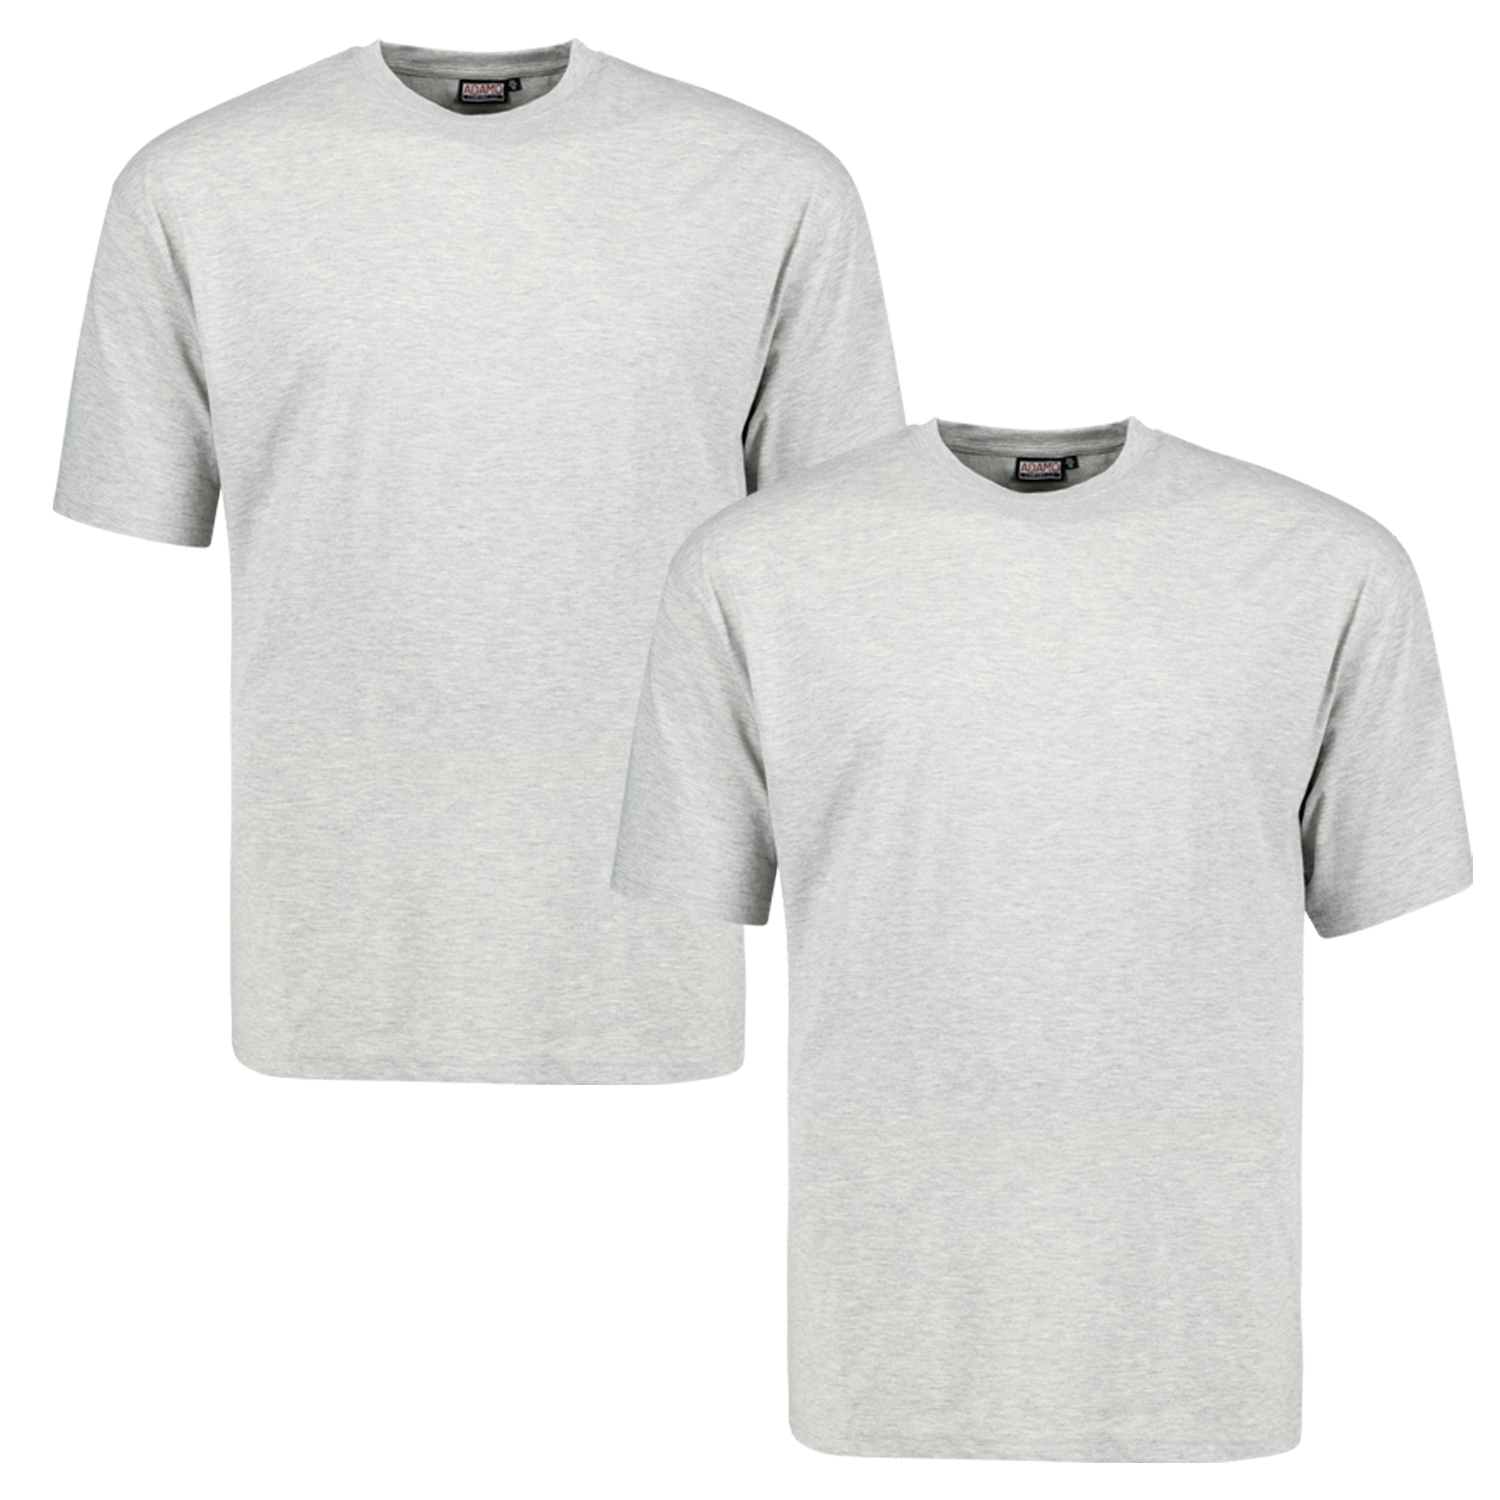 Double pack grey mottled MARLON t-shirt COMFORT FIT by ...